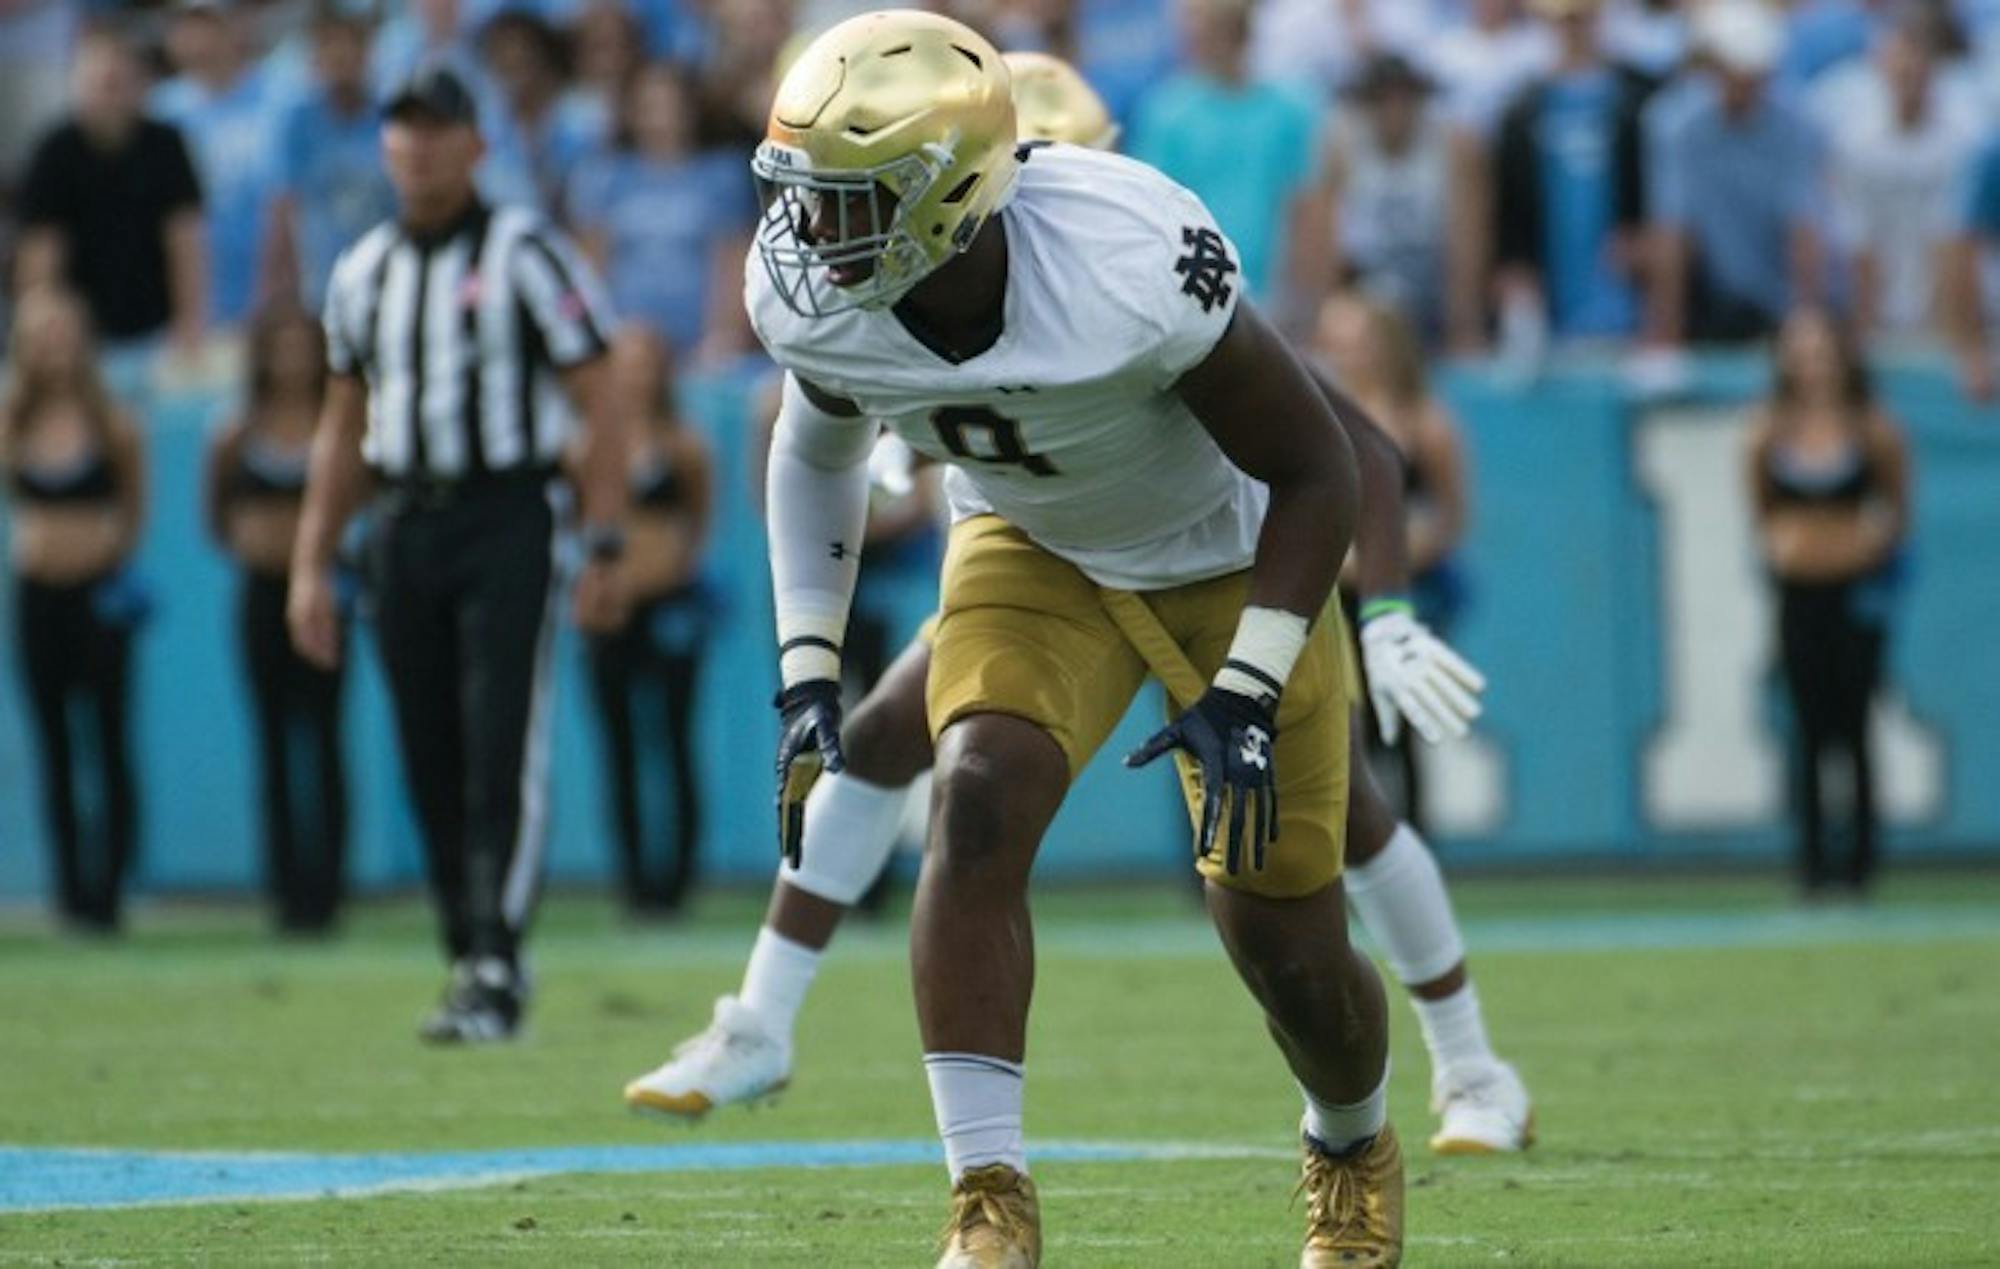 Irish sophomore defensive lineman Daelin Hayes lines up before the snap during Notre Dame’s 33-10 victory over North Carolina on Oct. 7 at Kenan Memorial Stadium in Chapel Hill, North Carolina.